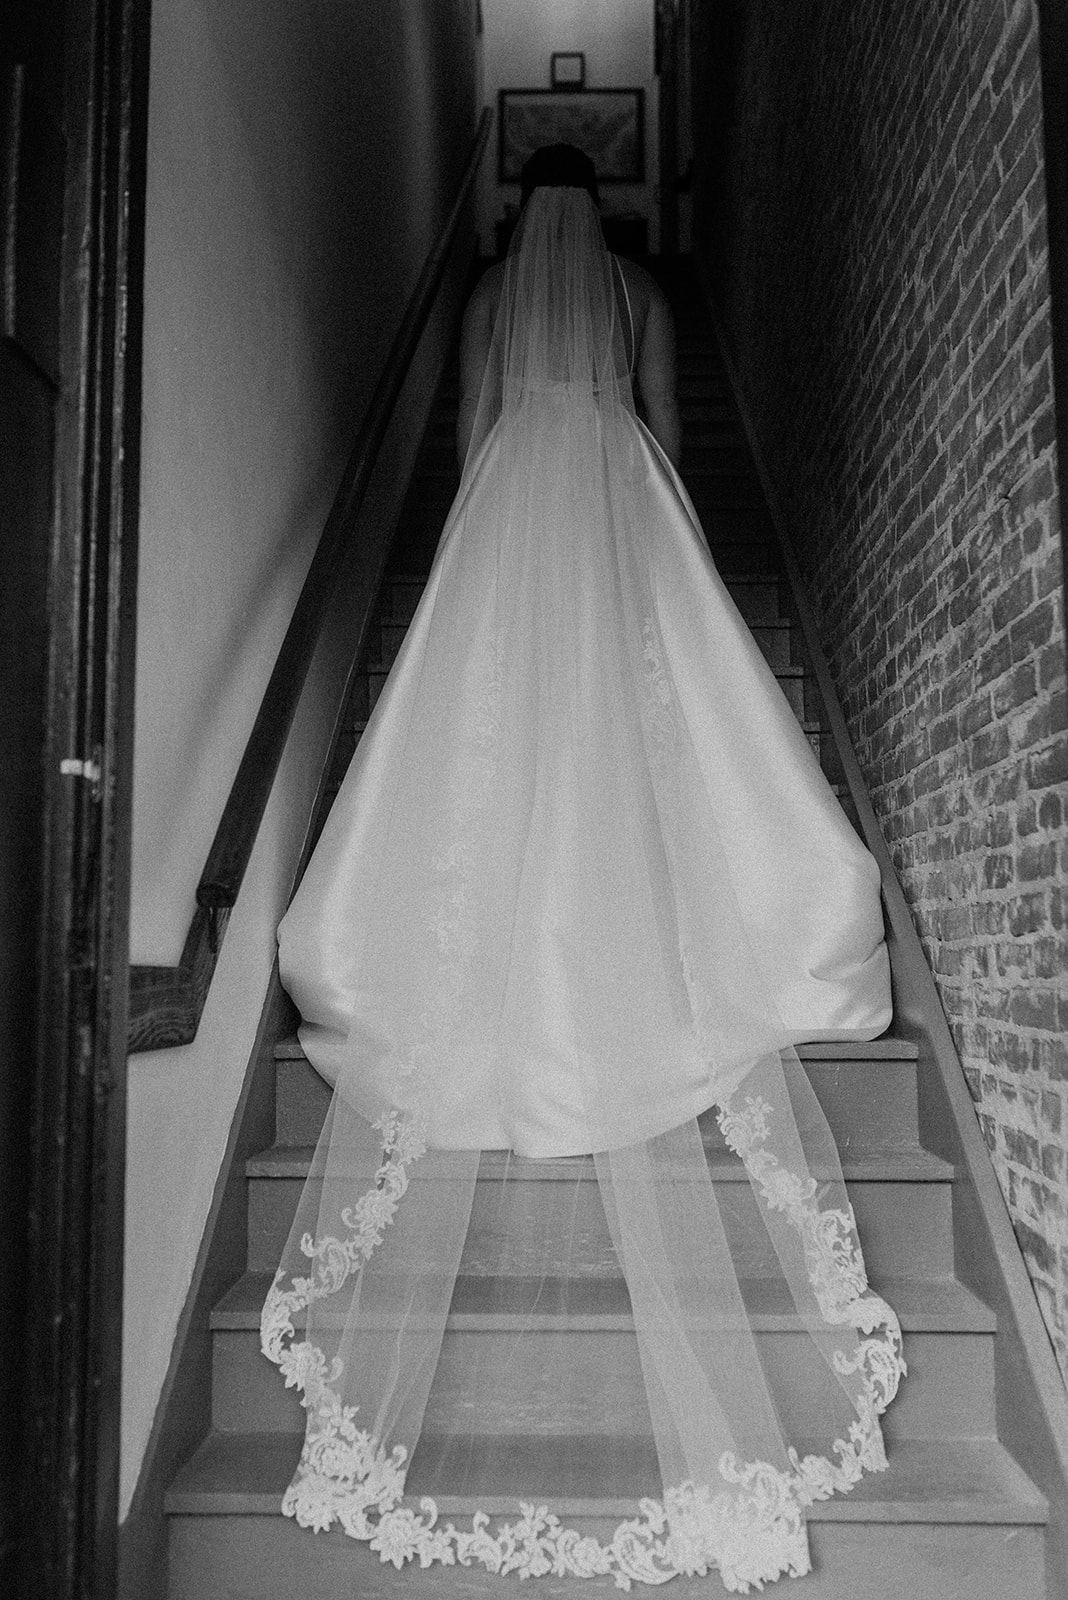 Bride on the staircase with gown trailing down